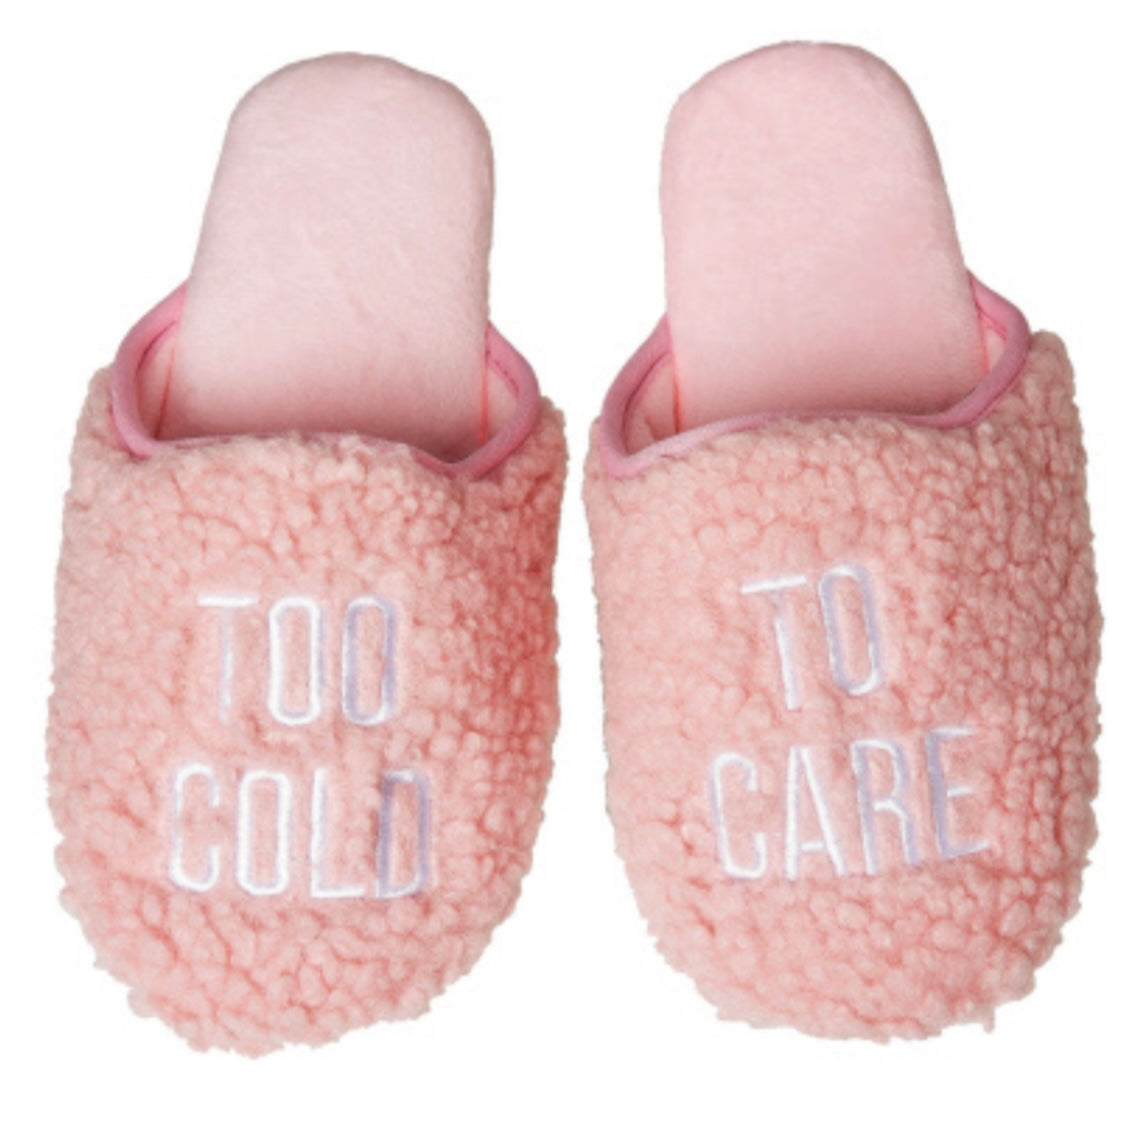 Too Cold To Care Slippers